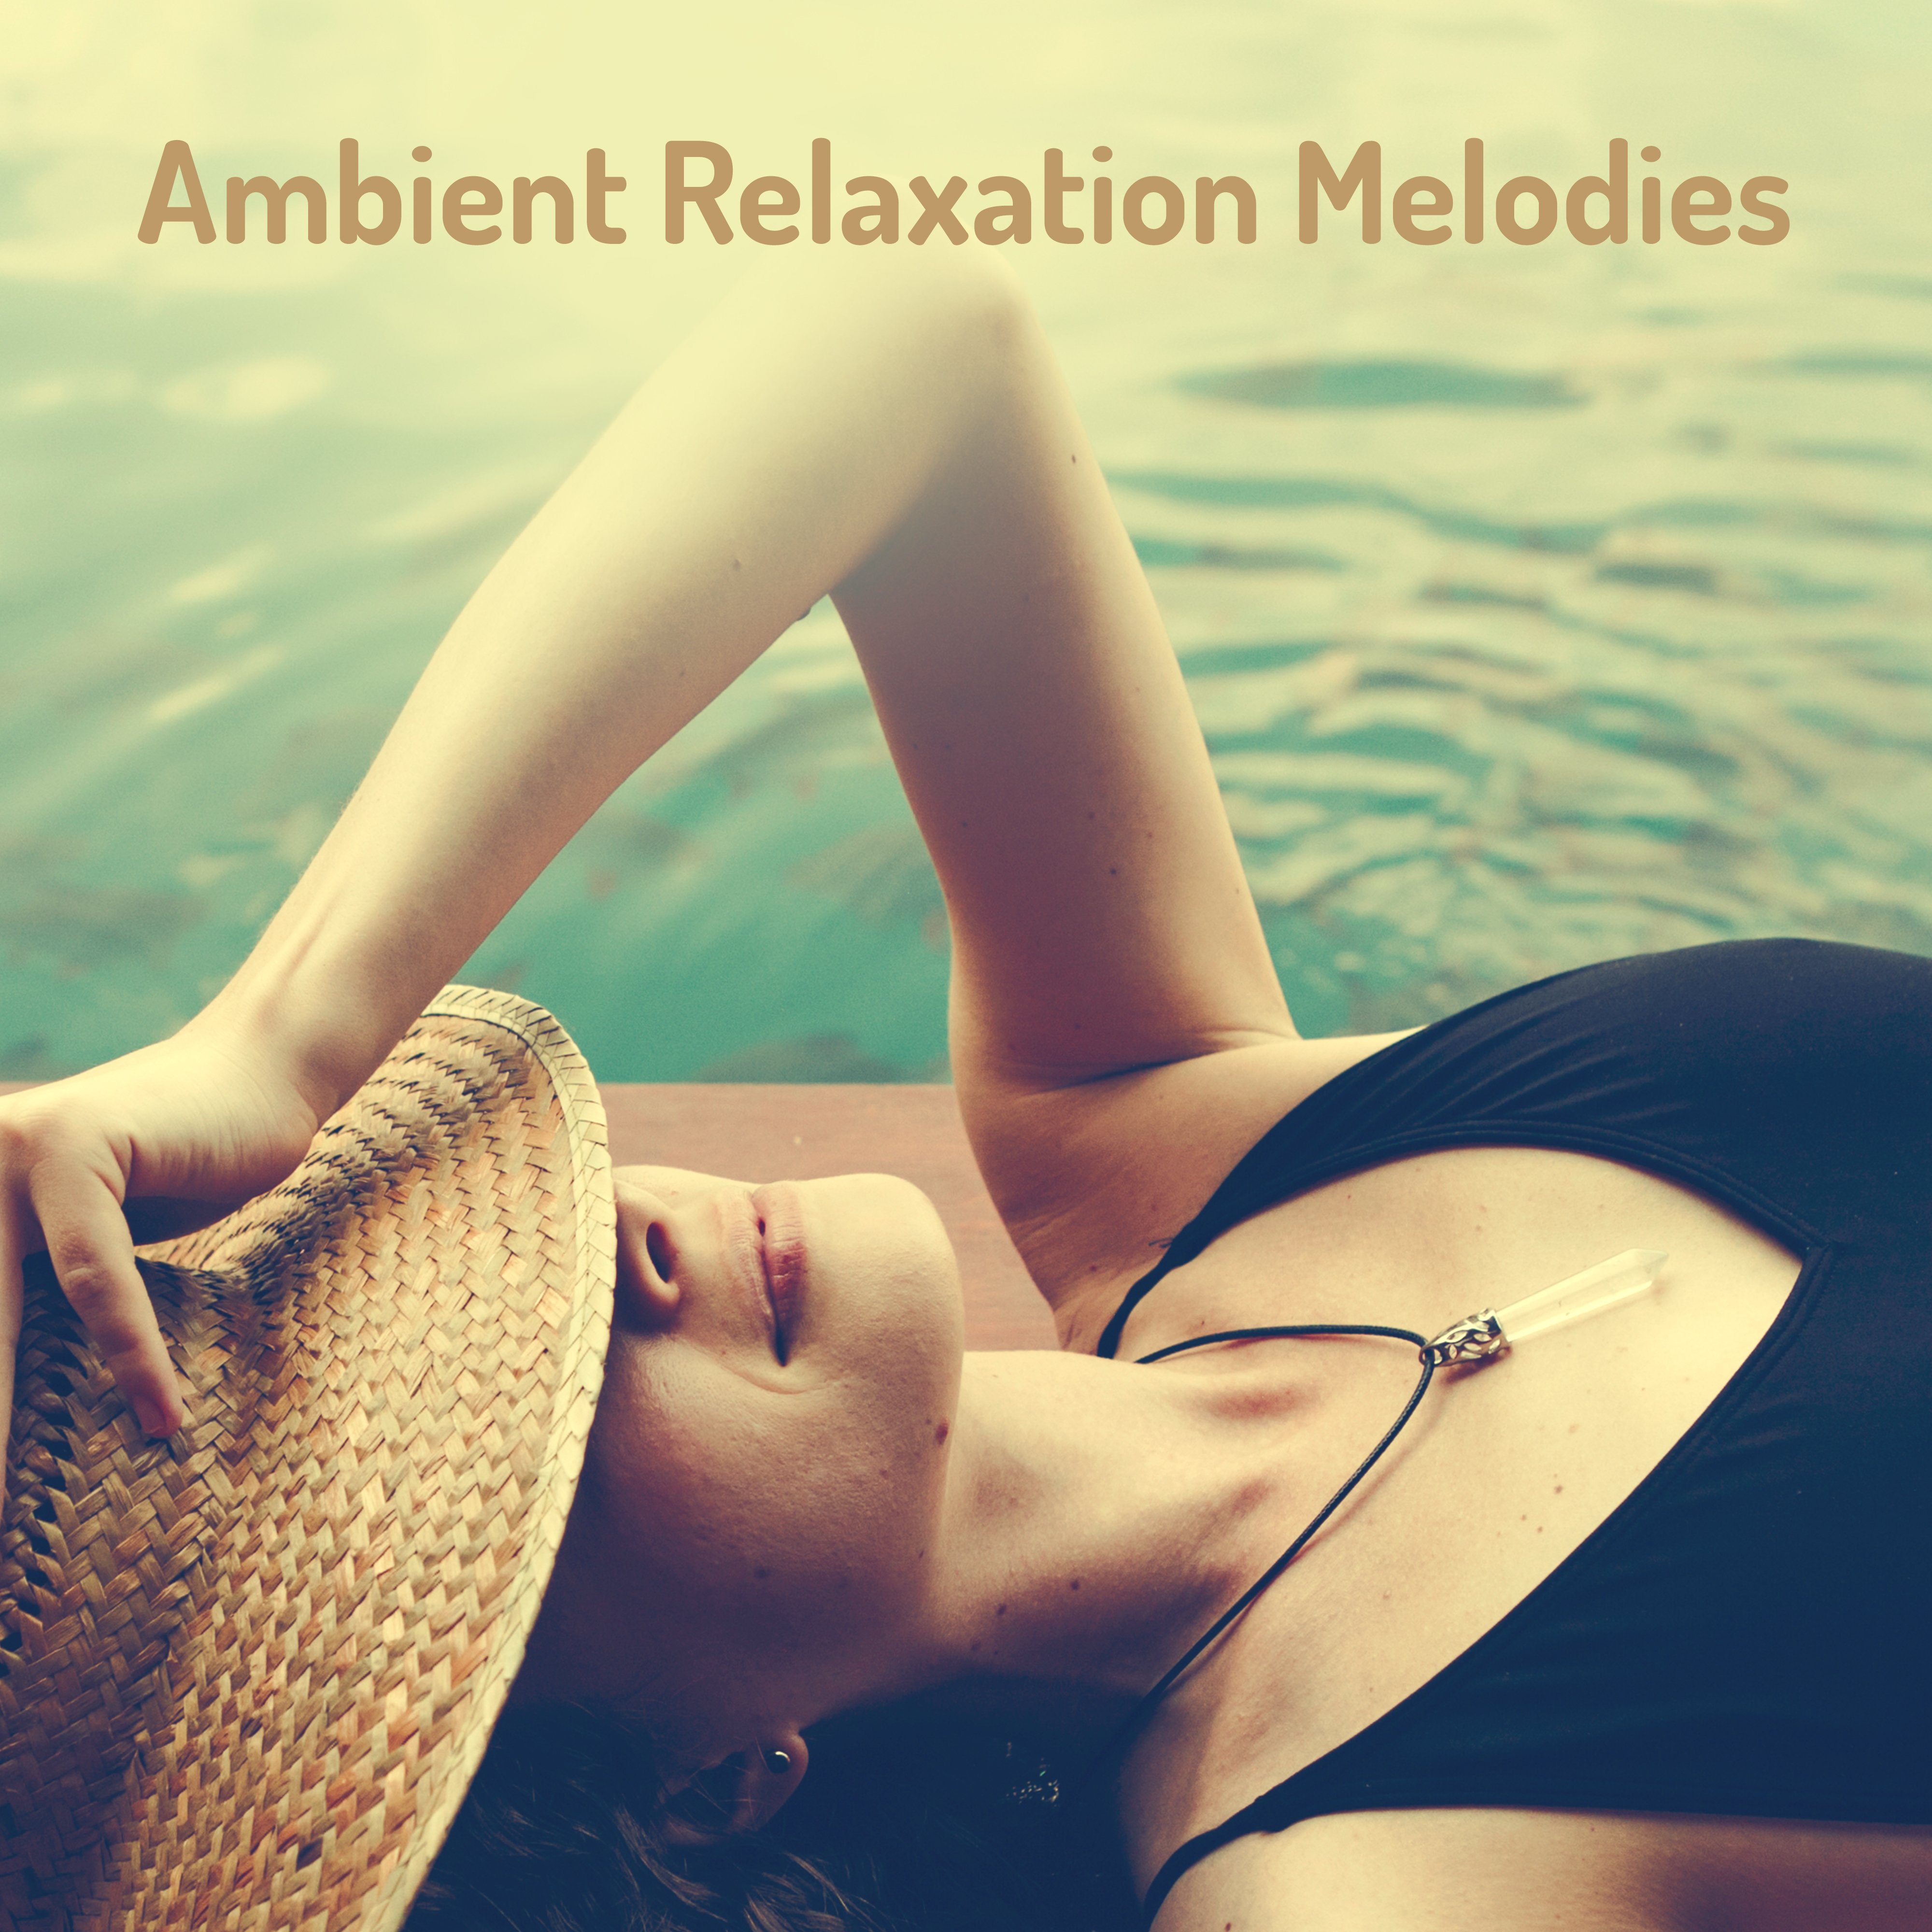 Ambient Relaxation Melodies